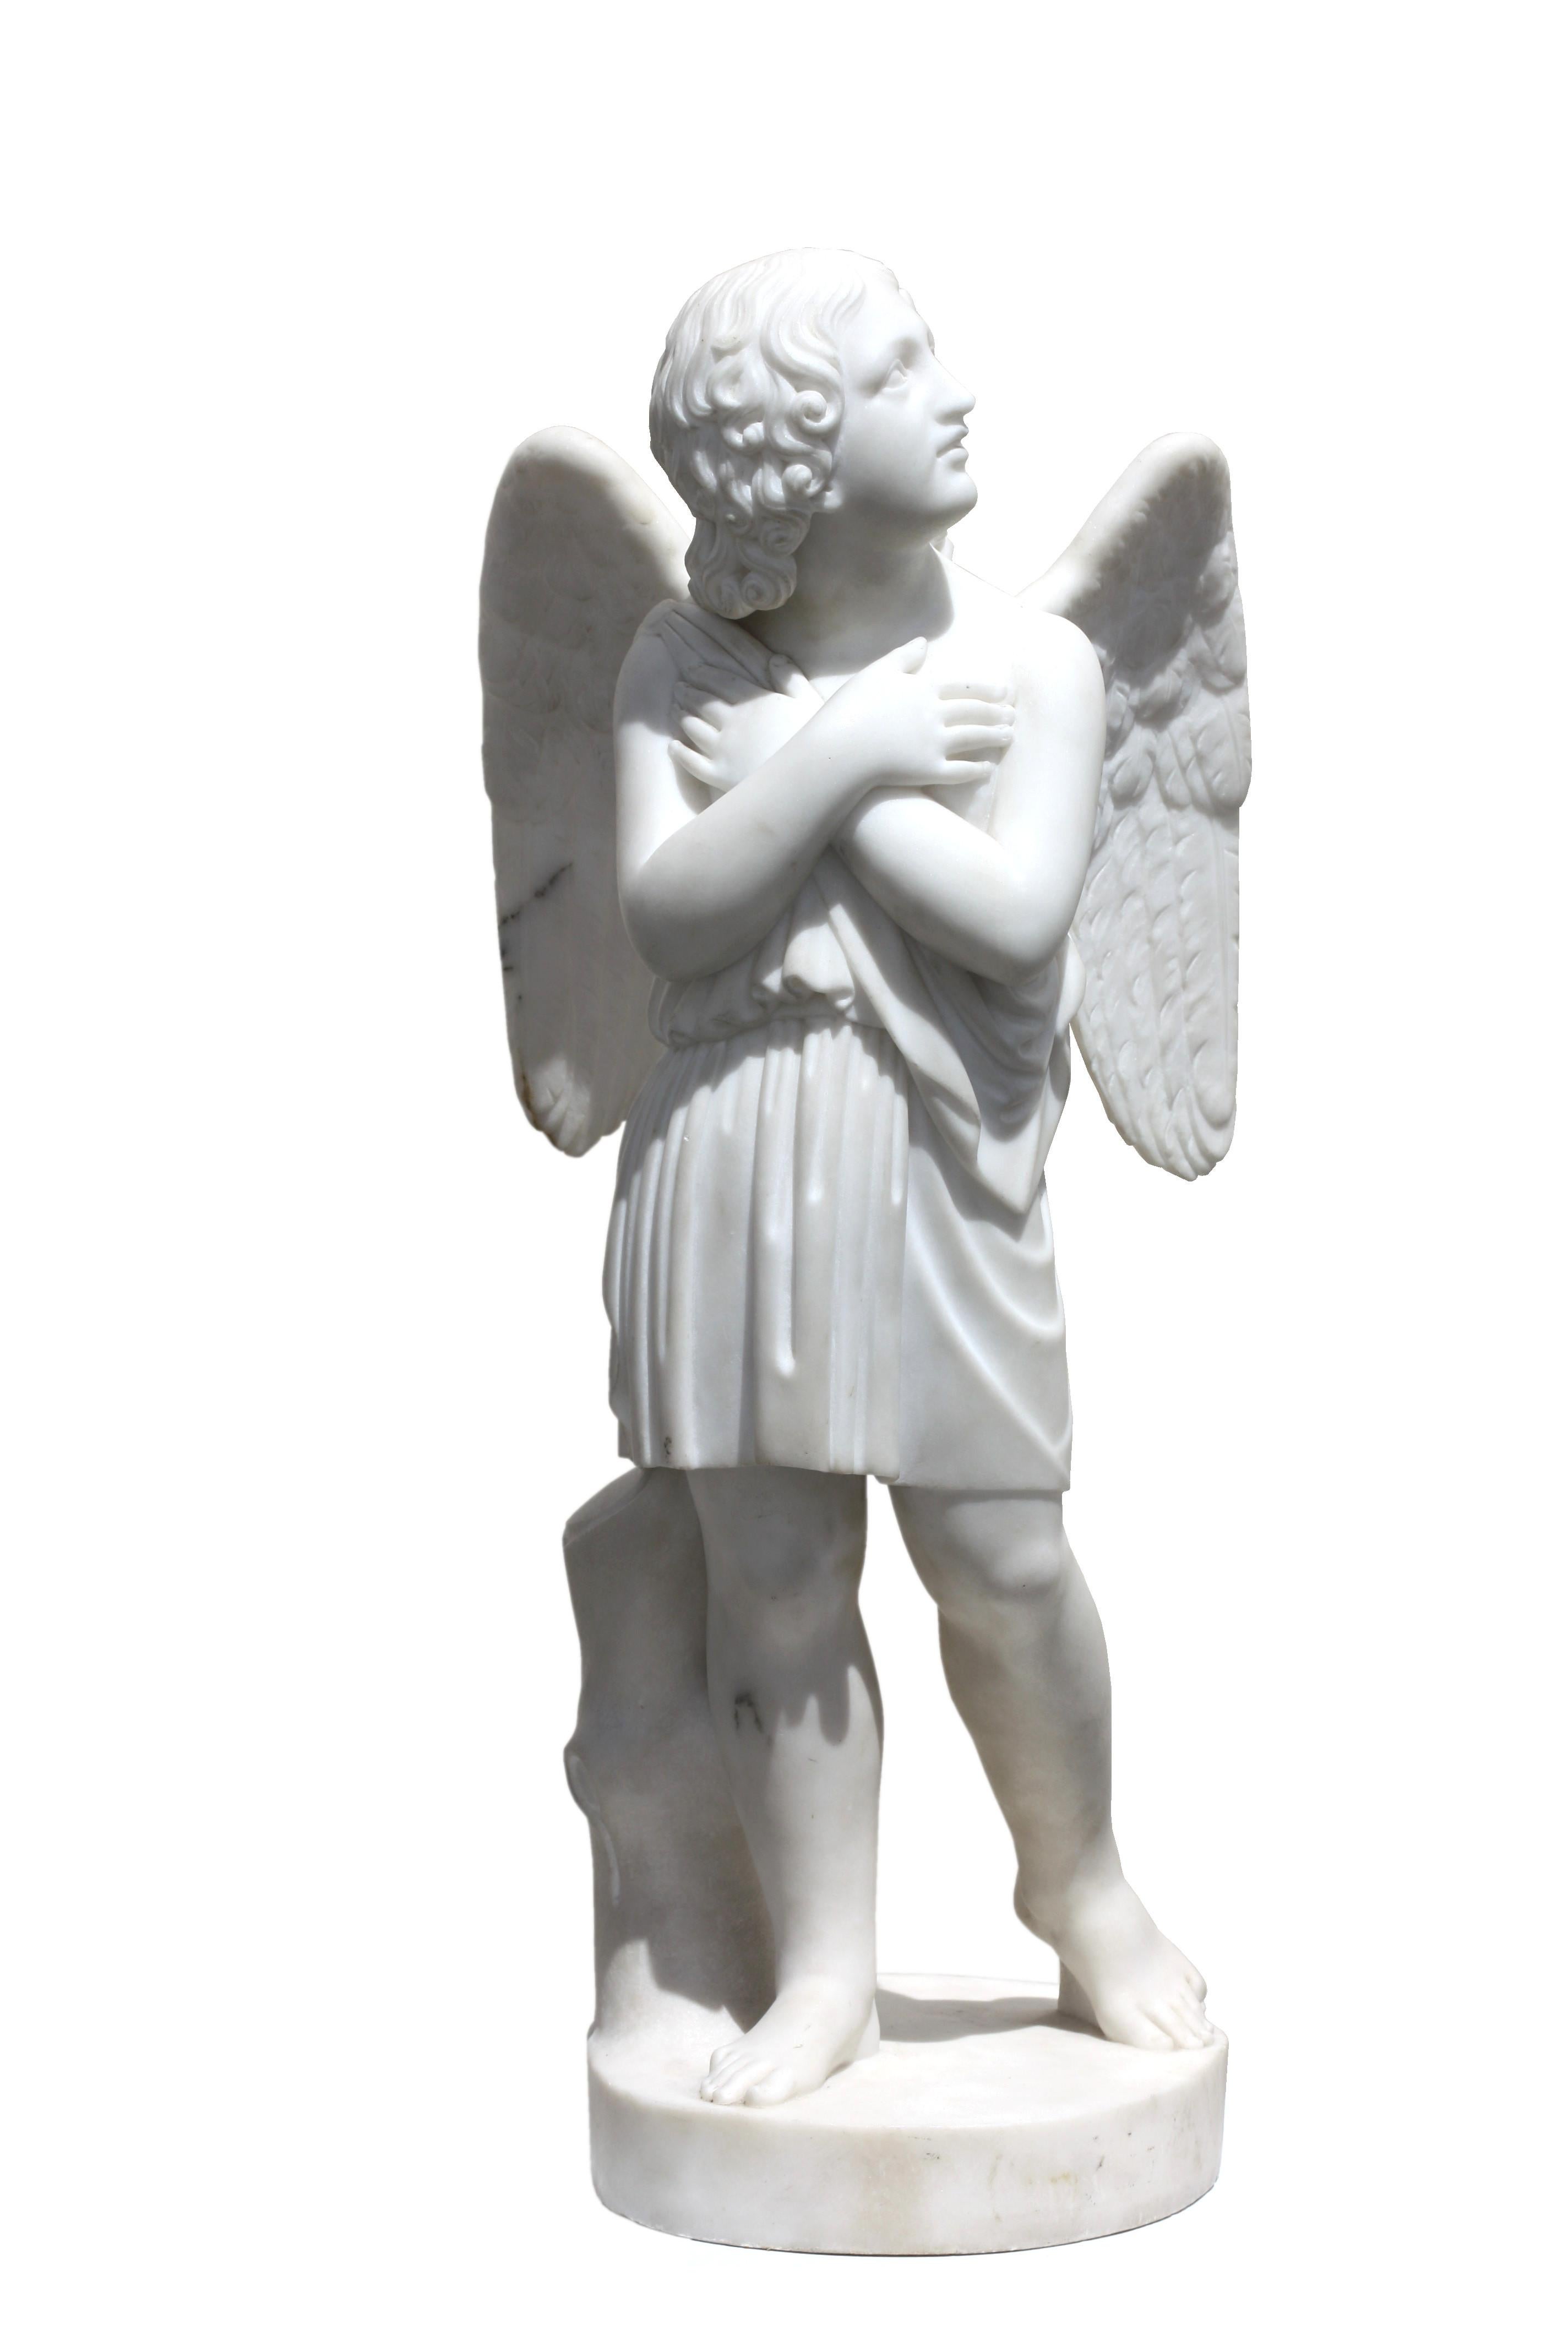 A marble figure of an angel after Pietro Bazzanti (c.1823-c.1874)
Florence, 19th century
carved in the round, the gaze directed towards heaven and hands folded over the chest, integral circular base 
Measures: Height 25.37 in. (64 cm.) 
Width